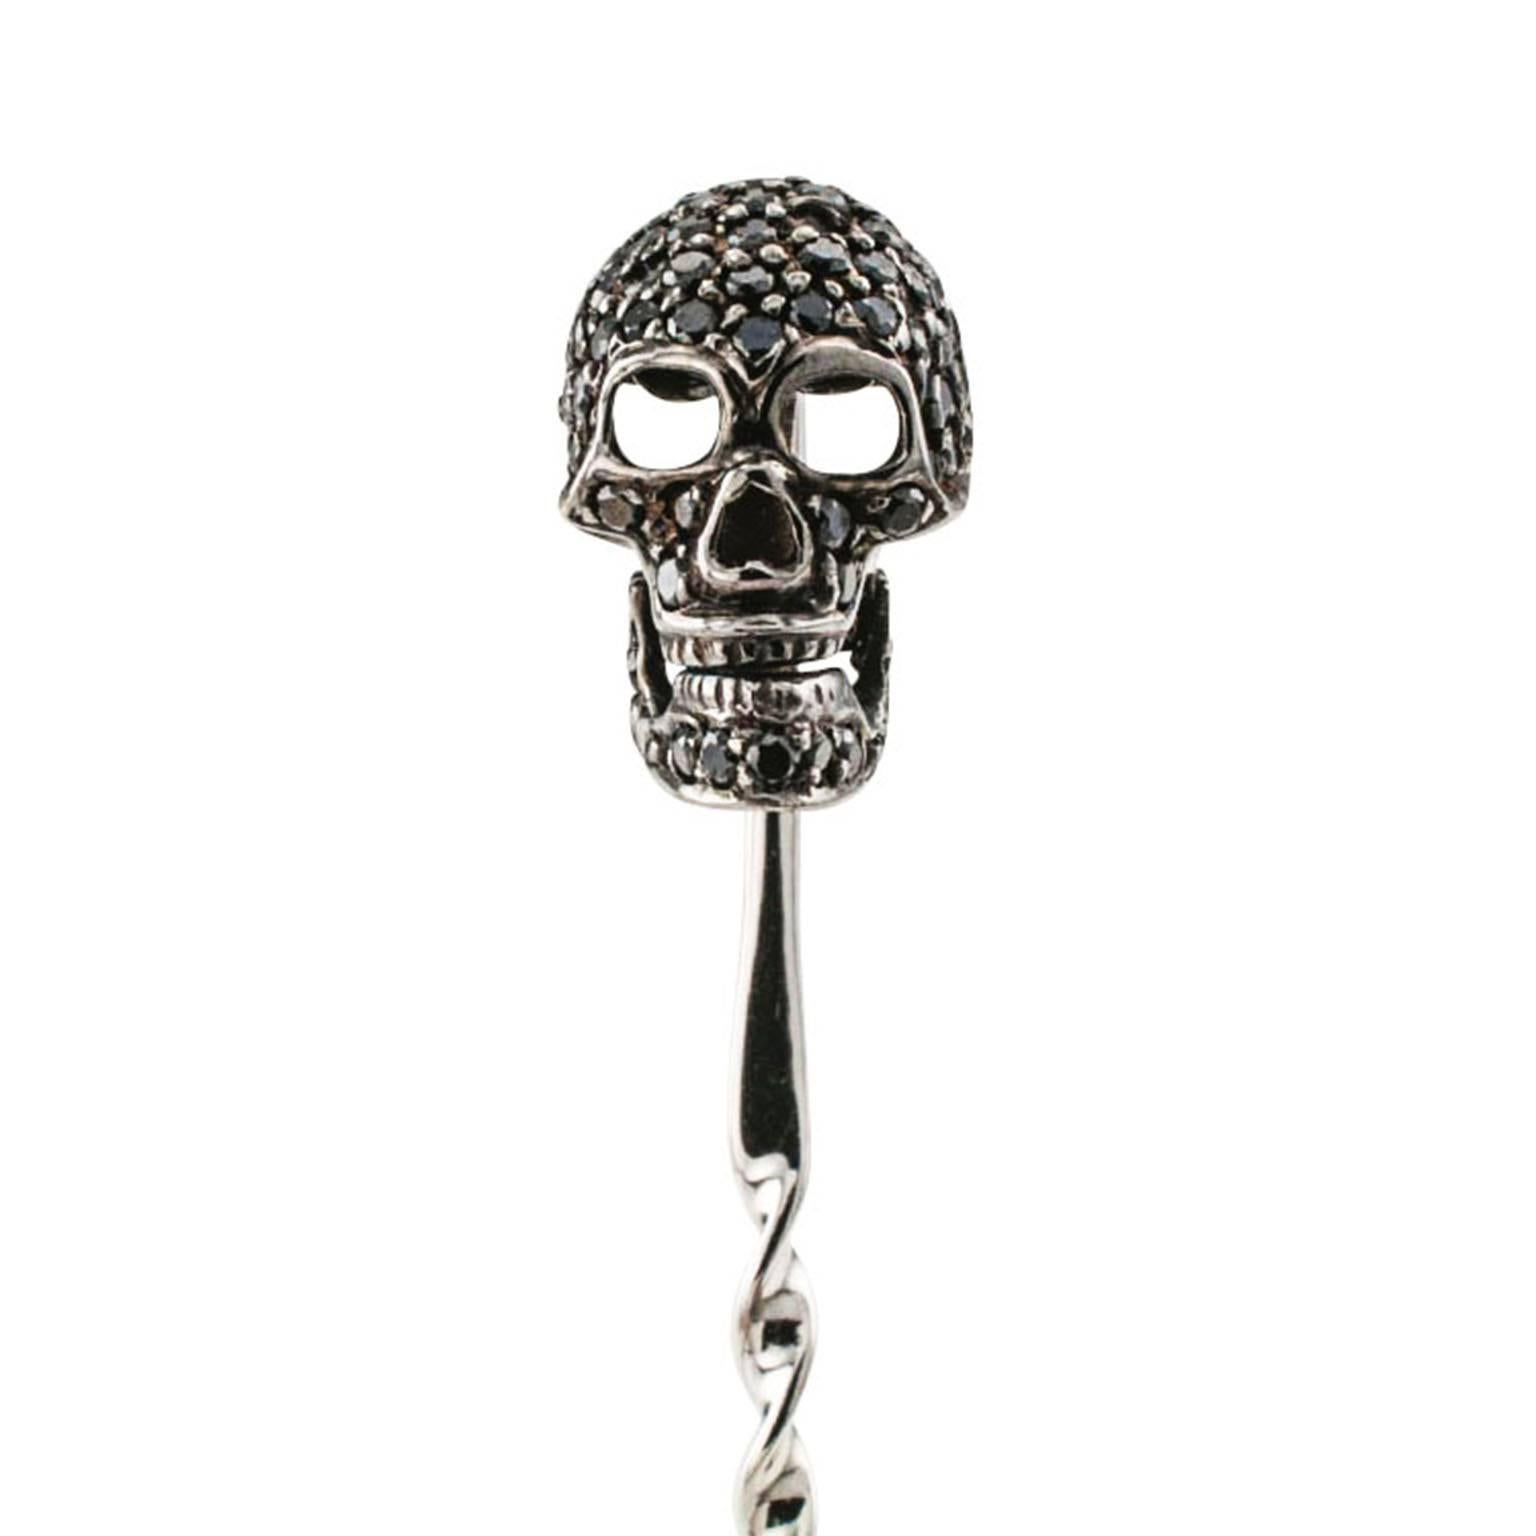 Contemporary Black Diamond Skull Stick Pin by Deakin and Francis